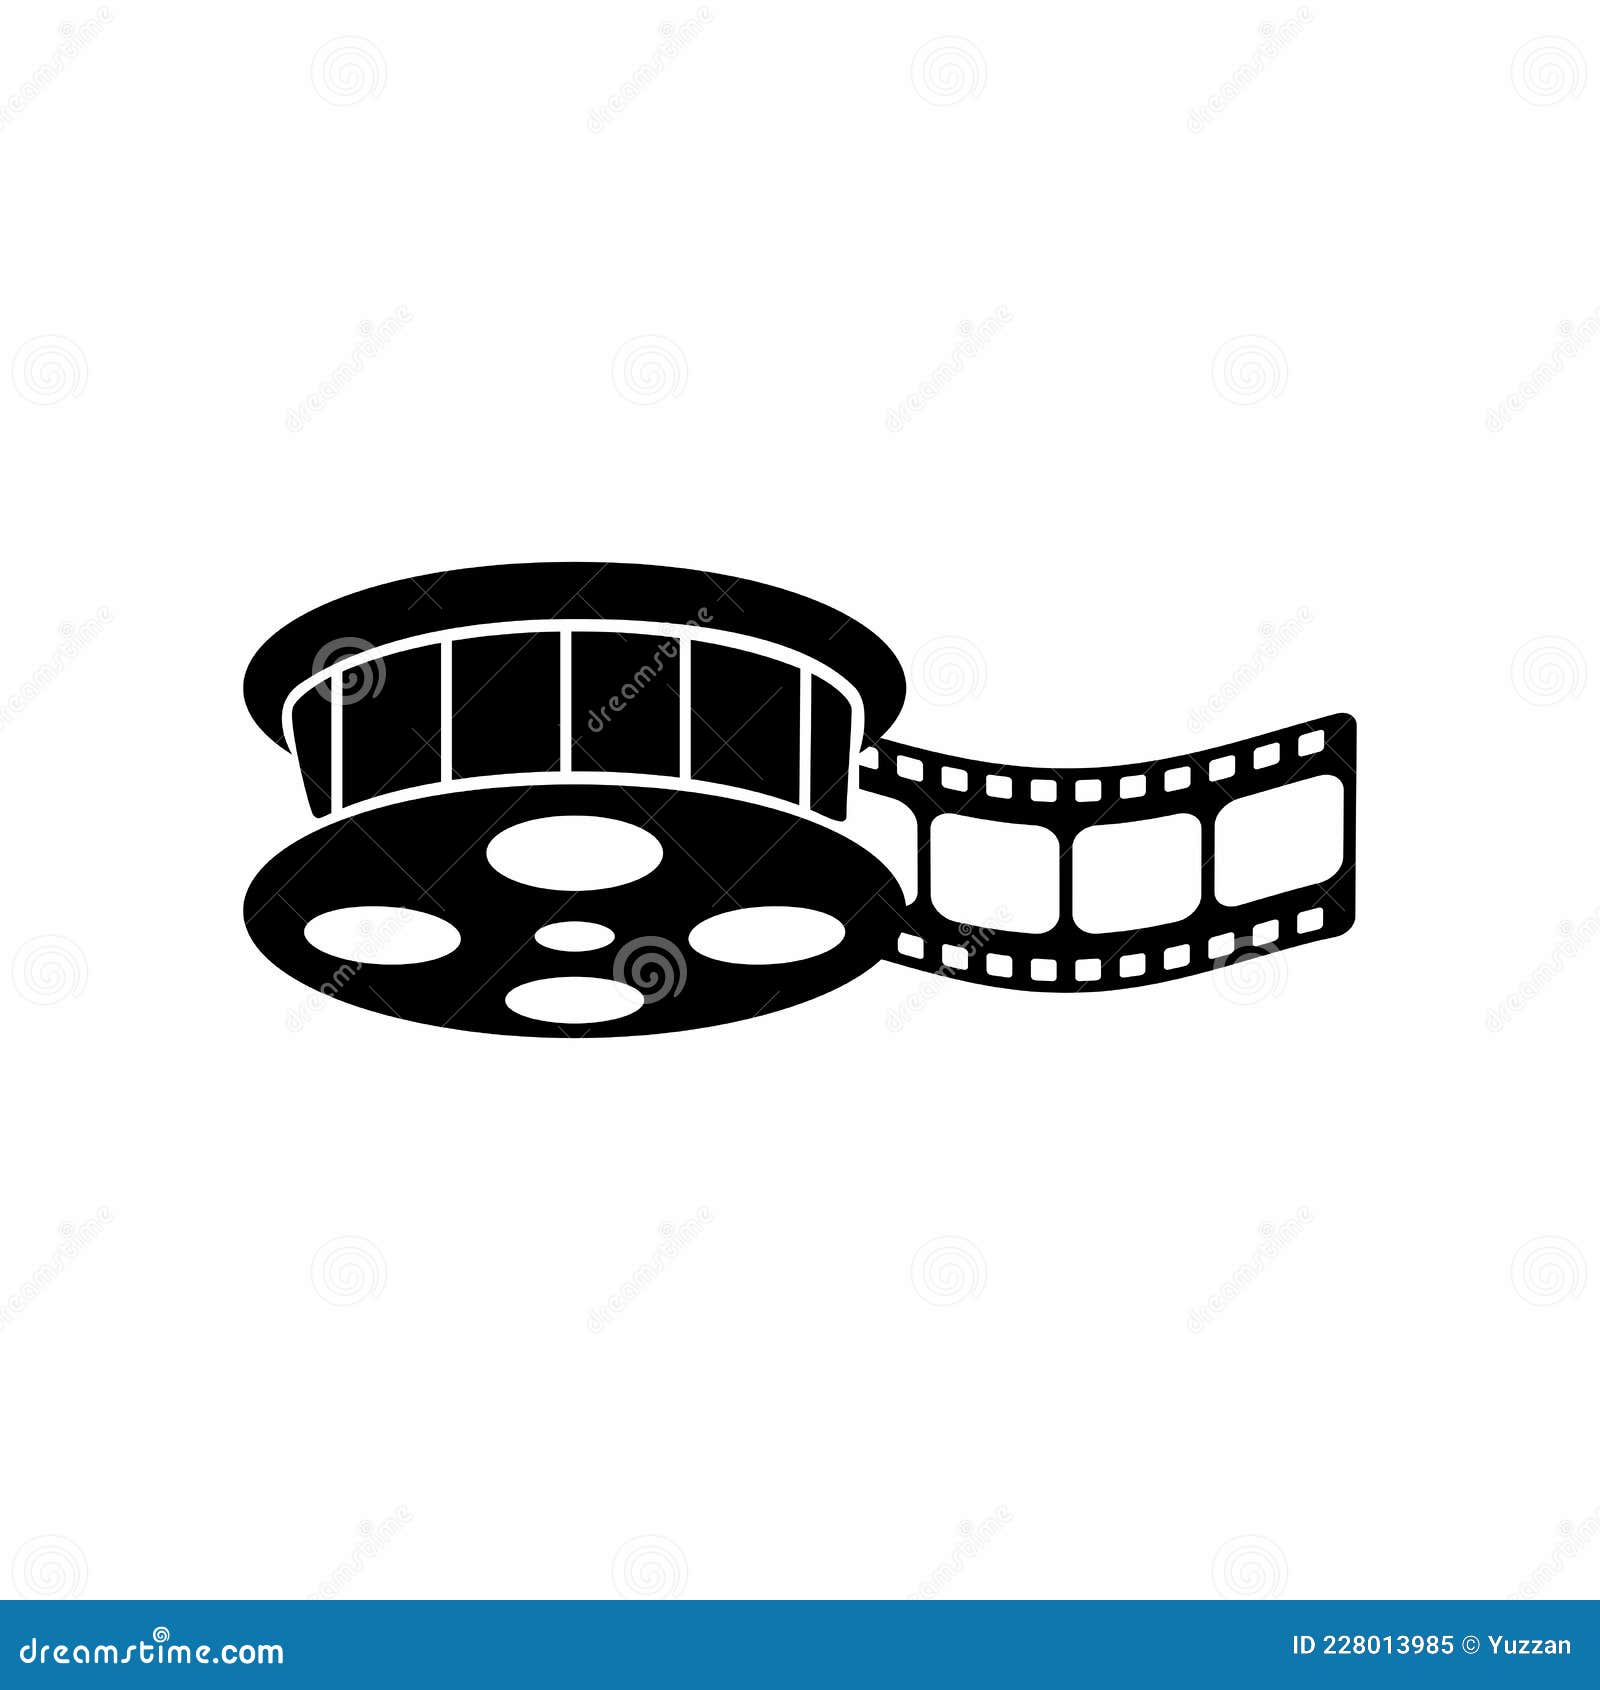 Simple and Clean Roll Film, Movie Tape Vector Design Stock Vector ...